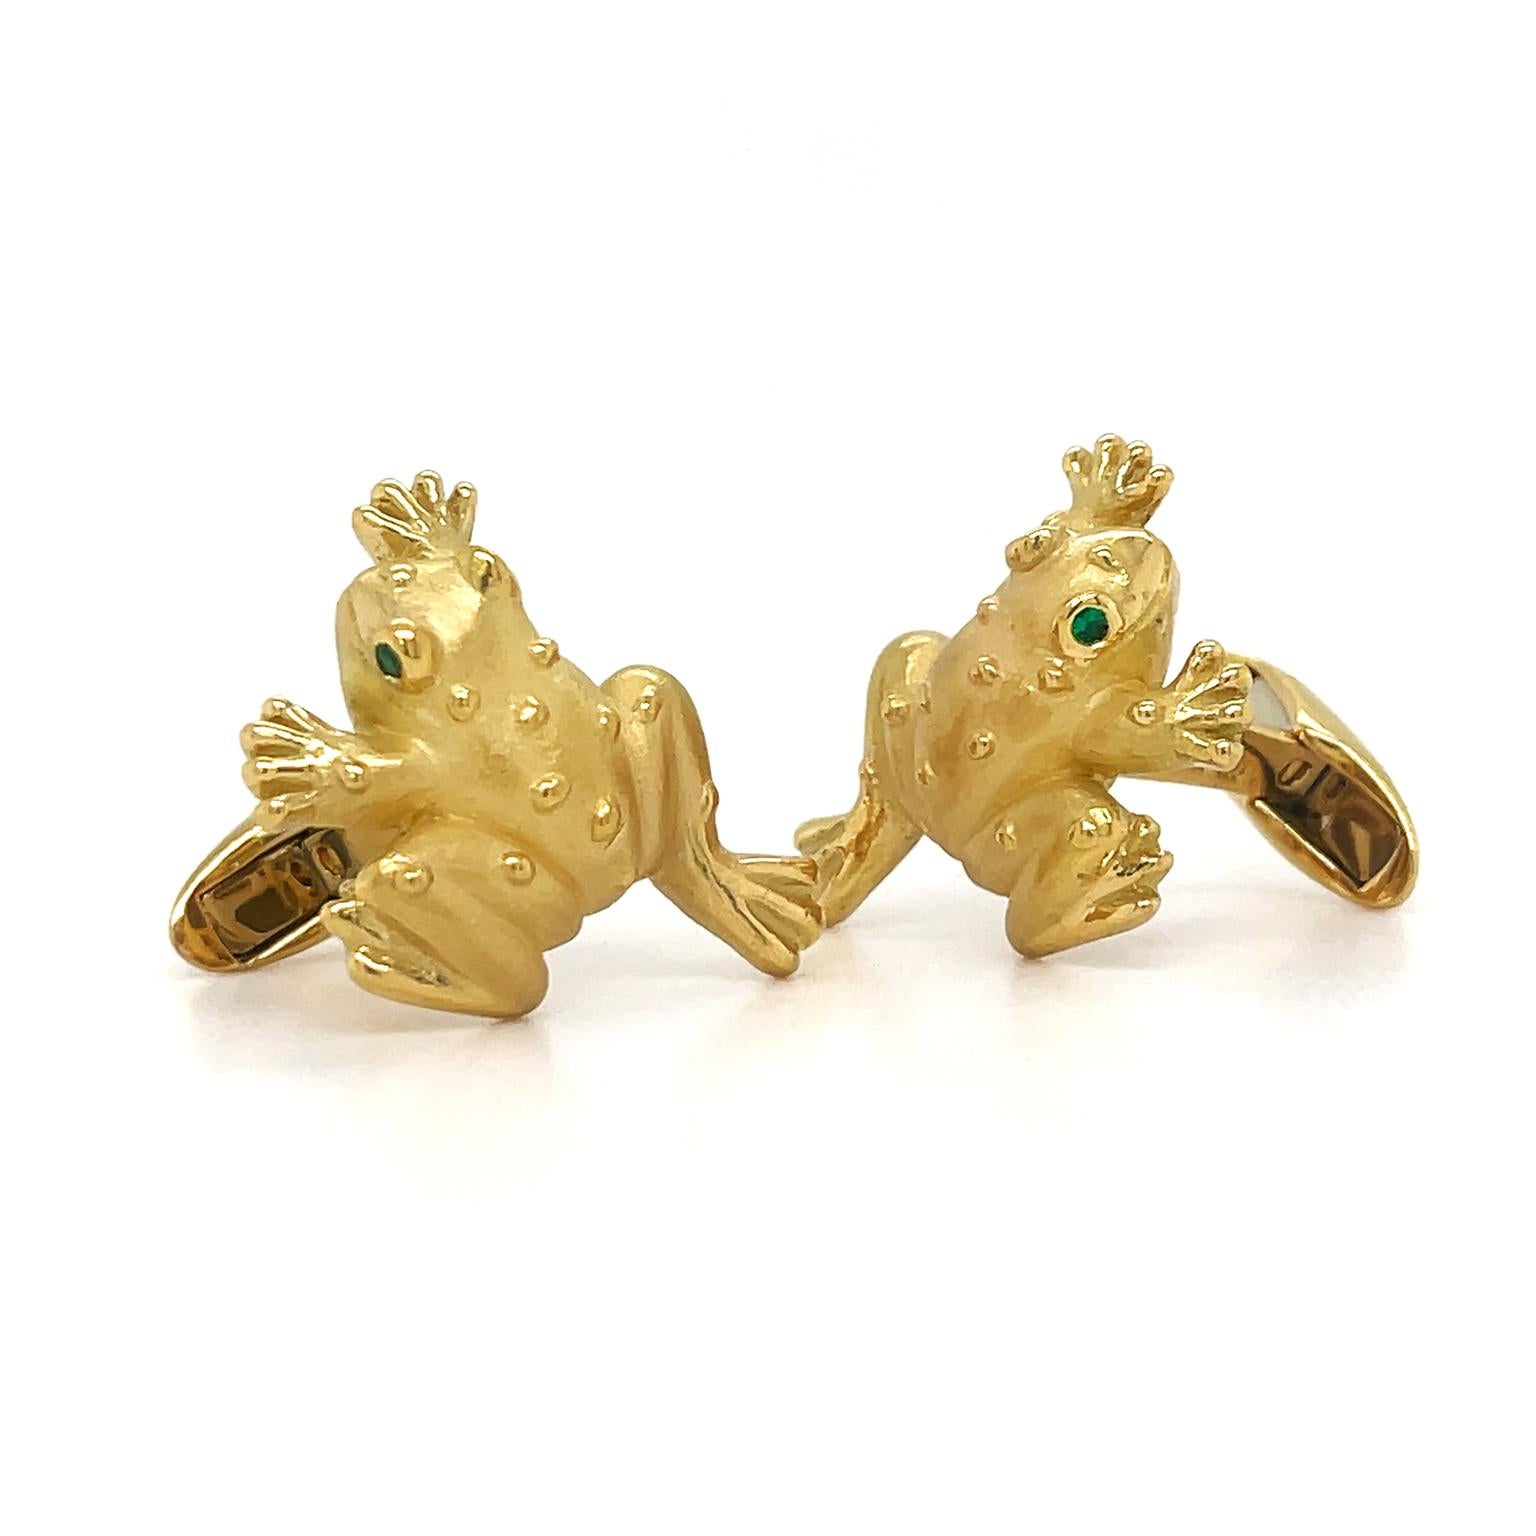 Frogs sculpted in 18k yellow gold scintillate as cufflinks. Detailing includes their webbed feet in motion and raised mounds for their eyes. A fixed bar and swivel toggle secure the cufflinks, which measure 0.95 inches (width) by 0.87 inches